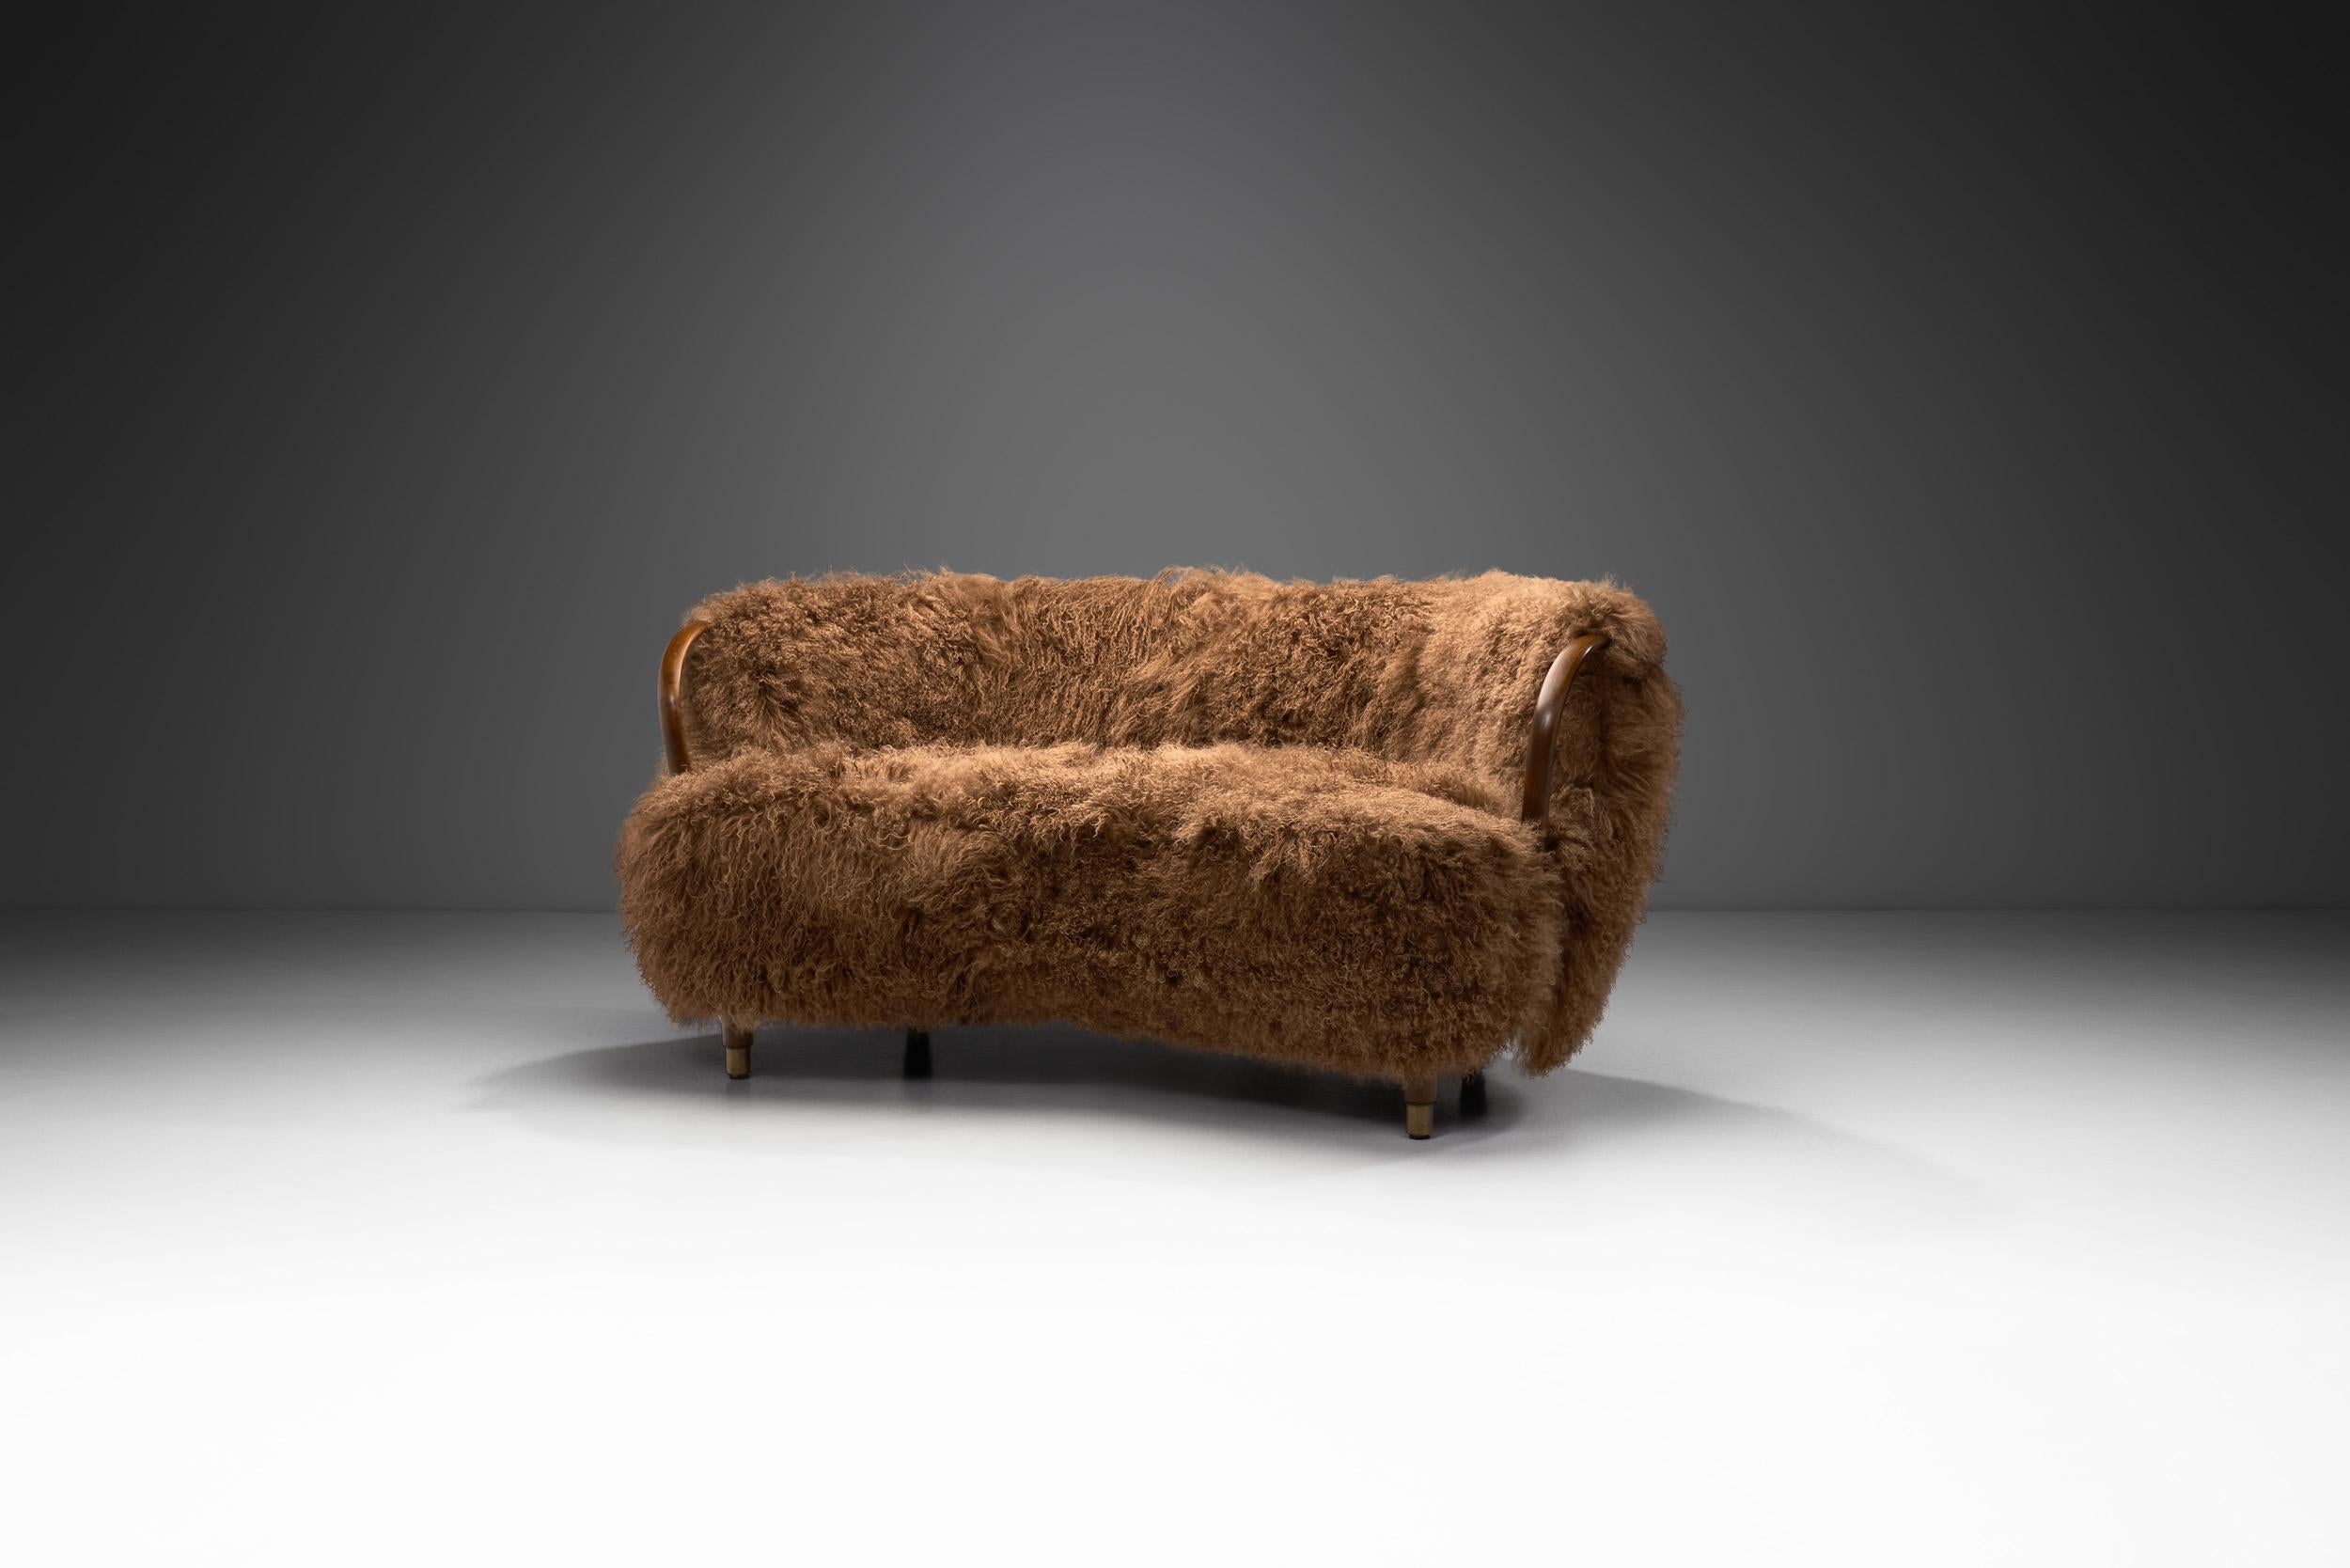 This Danish two-seater sofa by N. A. Jørgensens Møbelfabrik revolves around high-quality materials, comfort, and the mastery of the era’s cabinetmakers. The design in many ways transcend the word ‘modern’ thanks to its unique, flamboyant